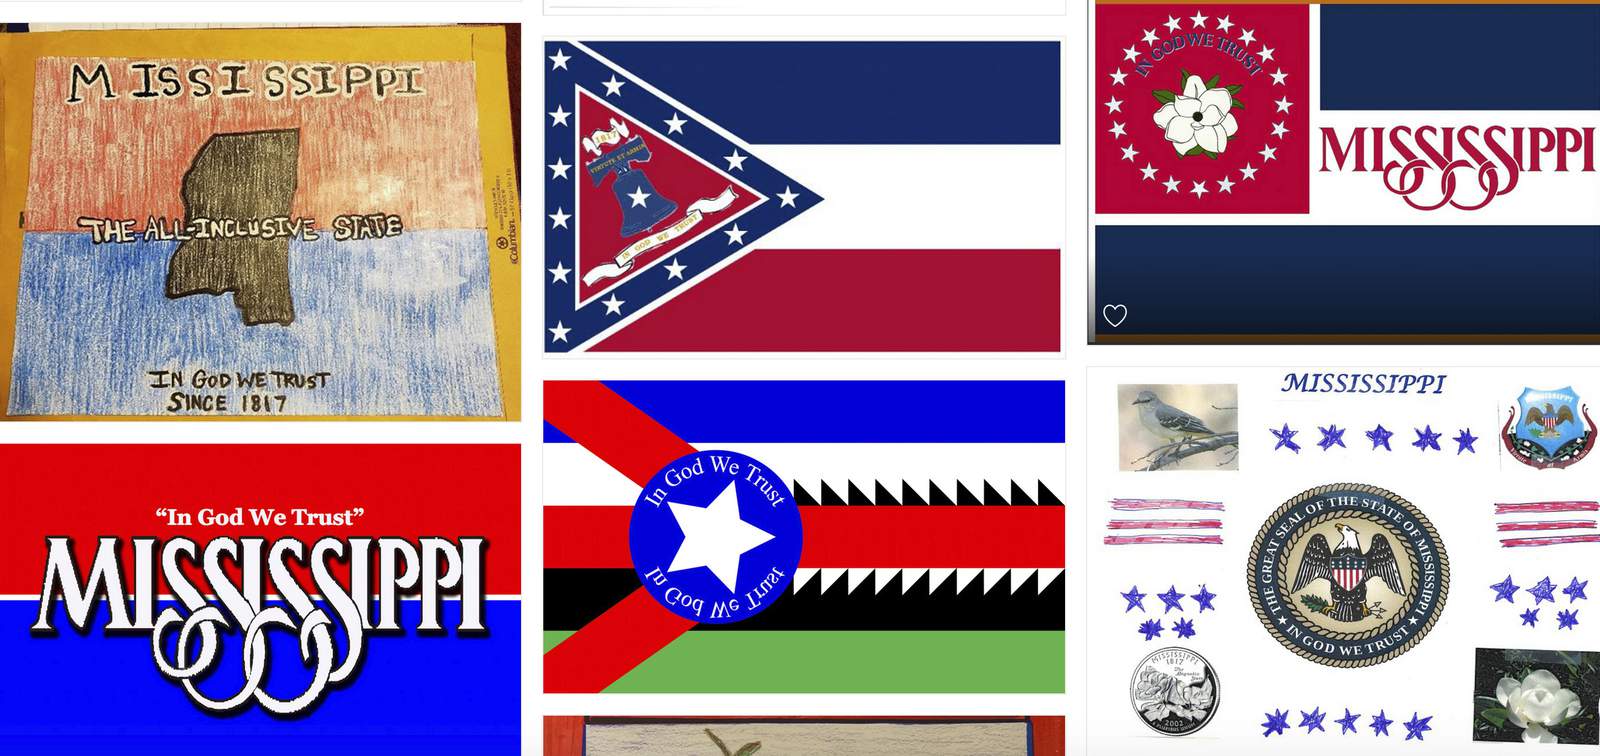 Creator of mosquito-themed state flag says design was a joke